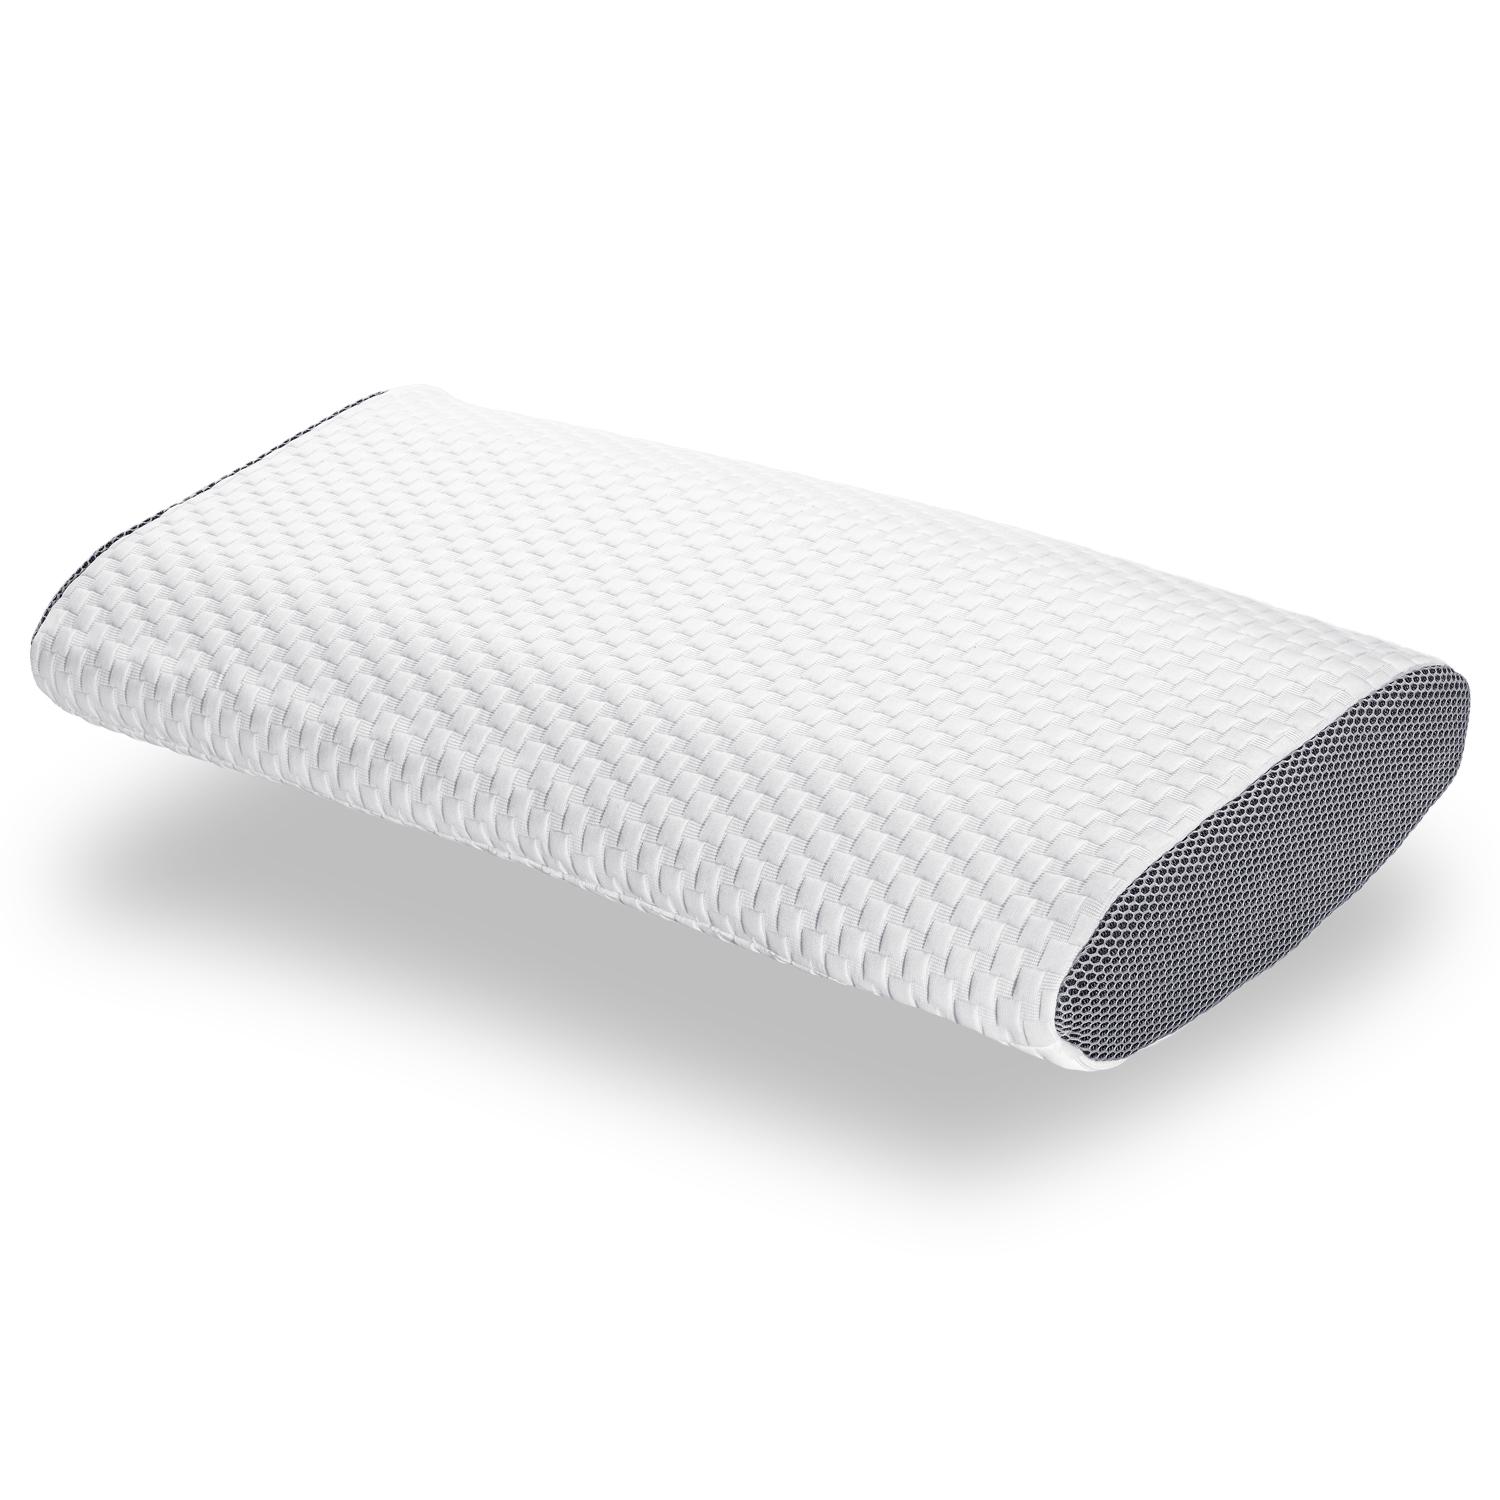 Sleezzz Cool viscoelastic neck support pillow 35 x 75 cm with special memory foam with lower temperature sensitivity than regular viscoelastic foam